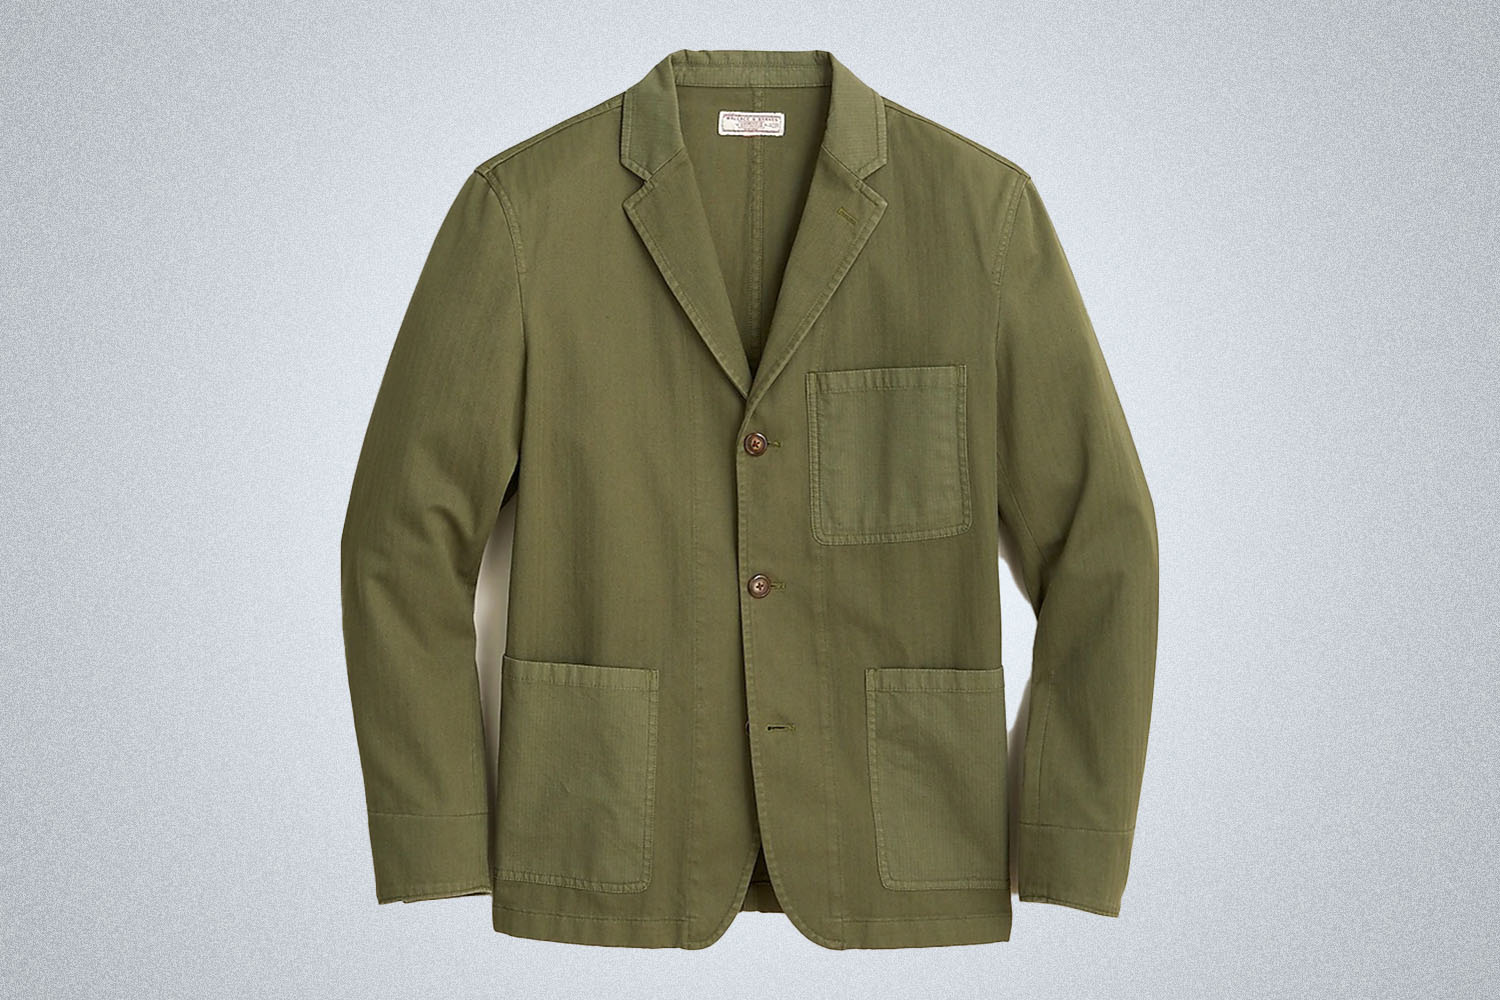 a green blazer from Wallace and Barnes on a grey background